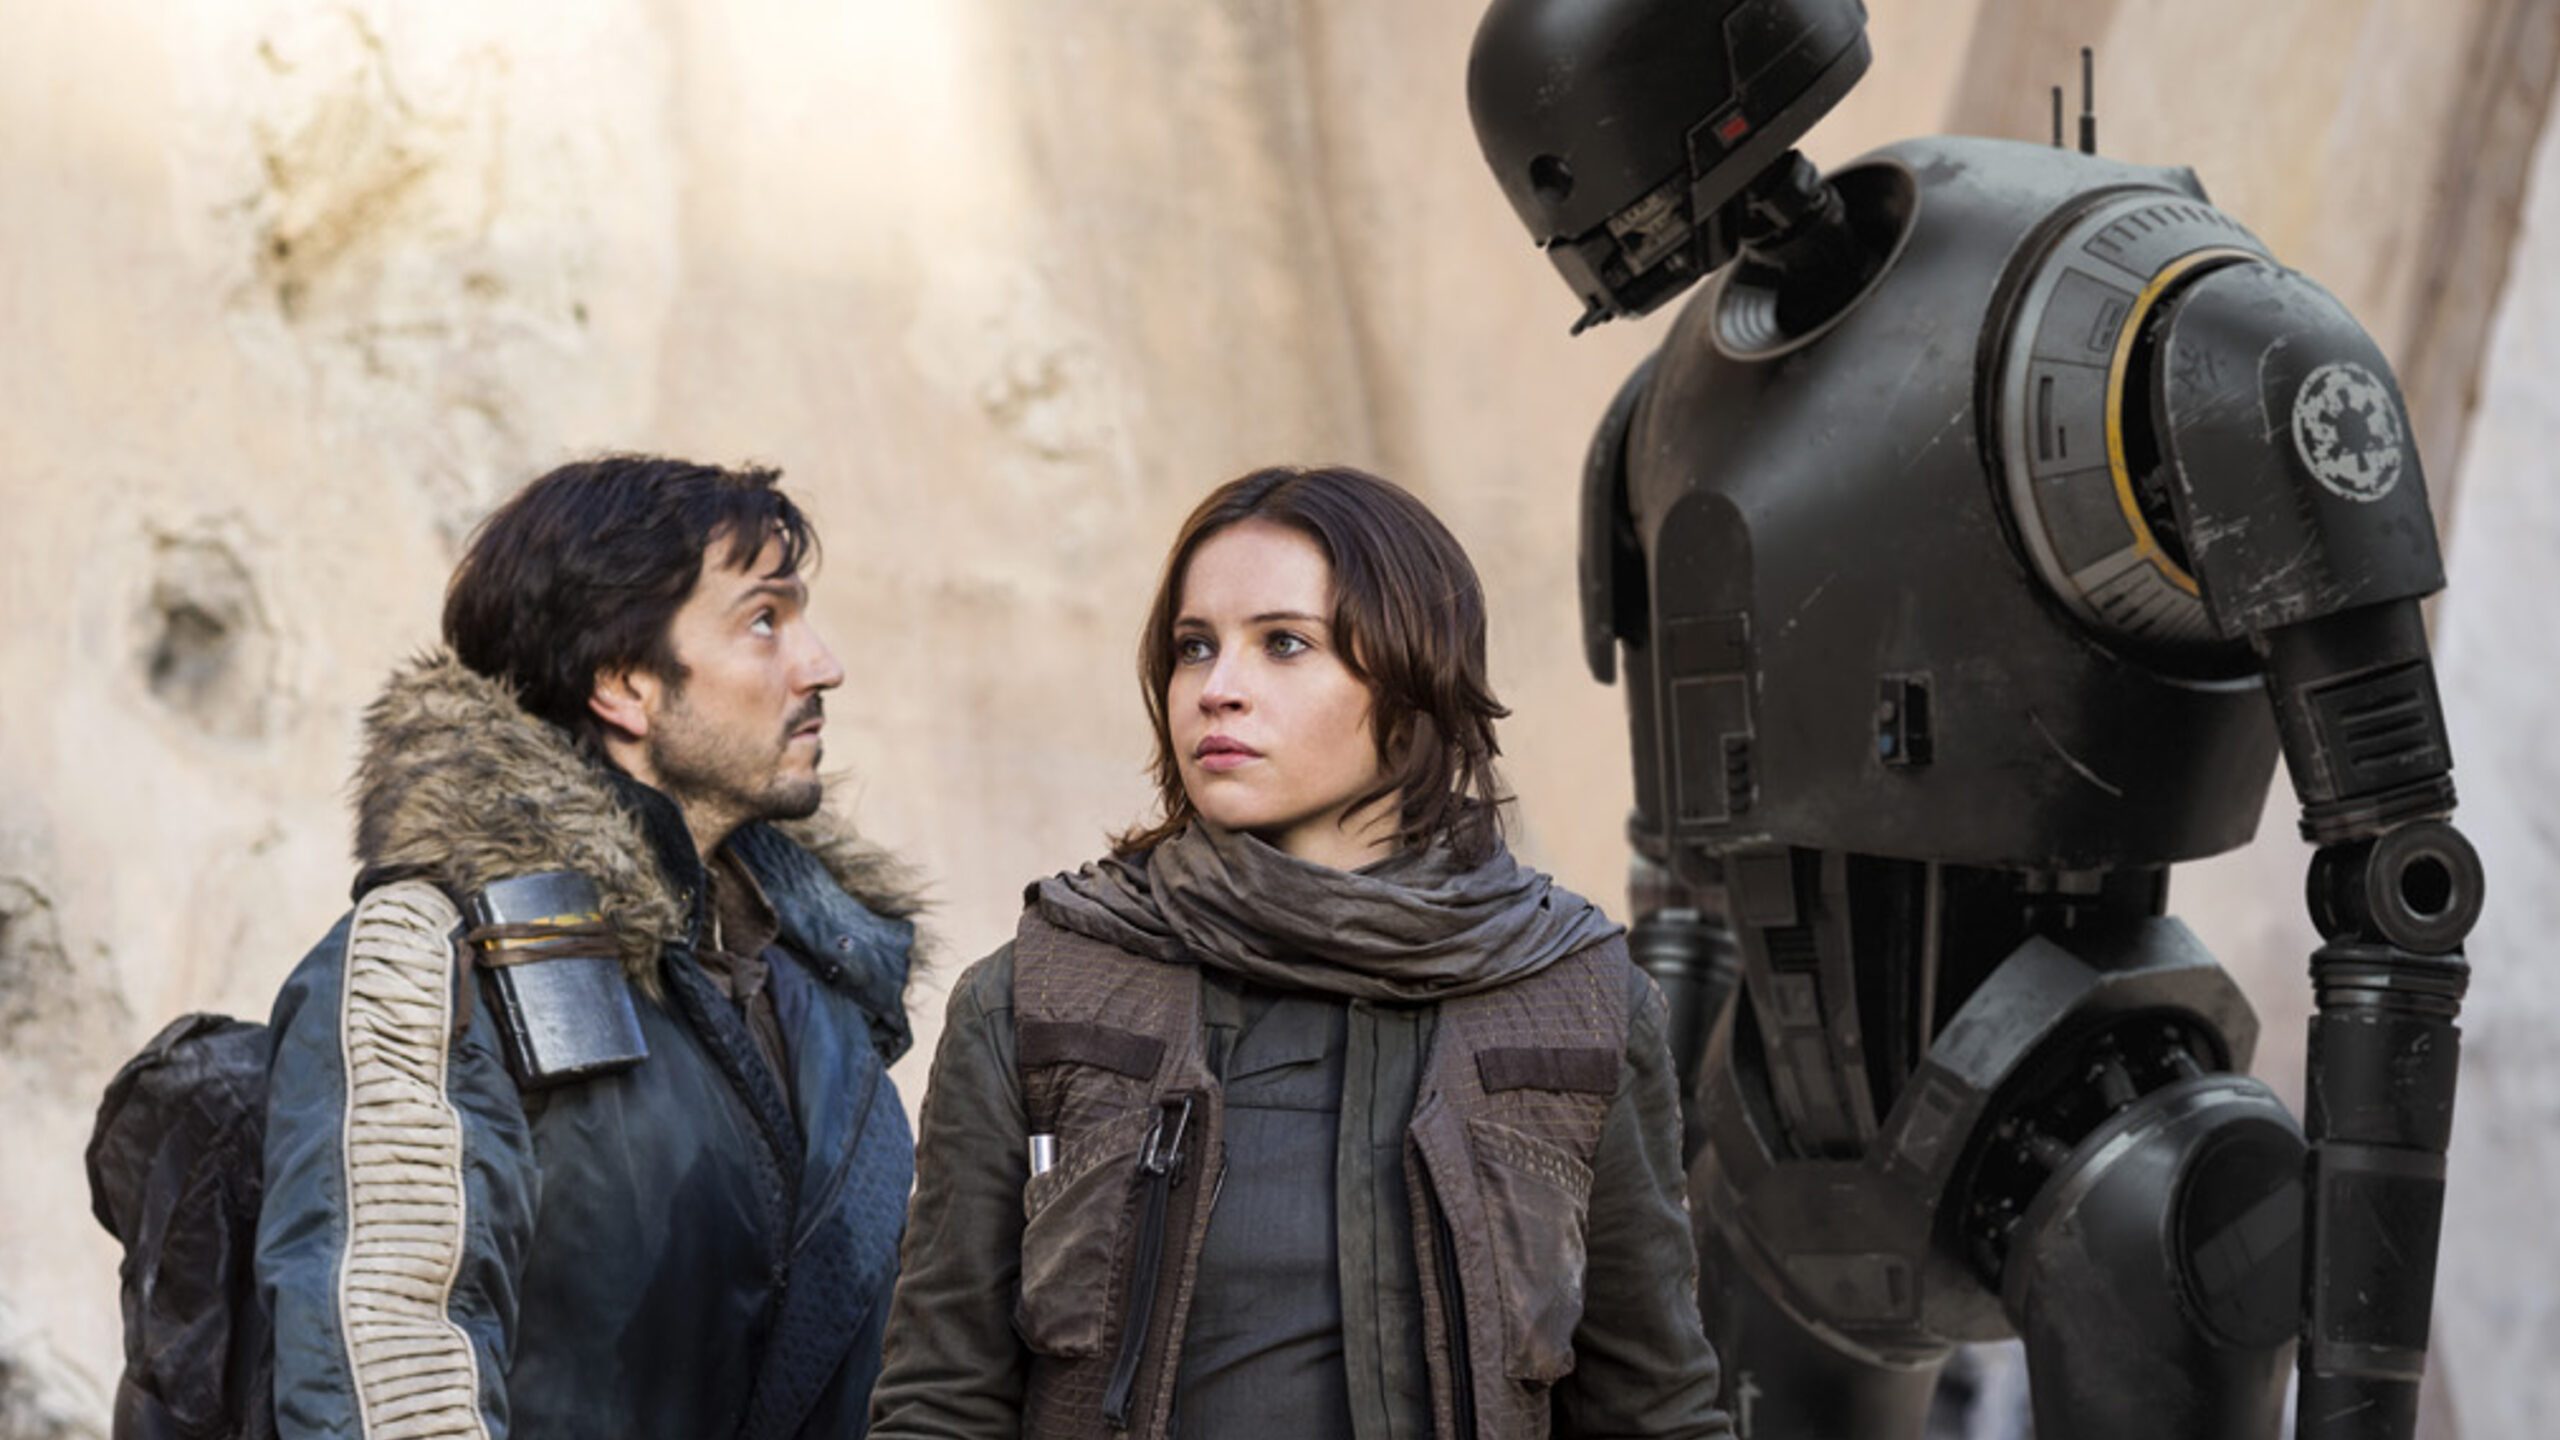 ‘Rogue One’ blasts way to top of box office